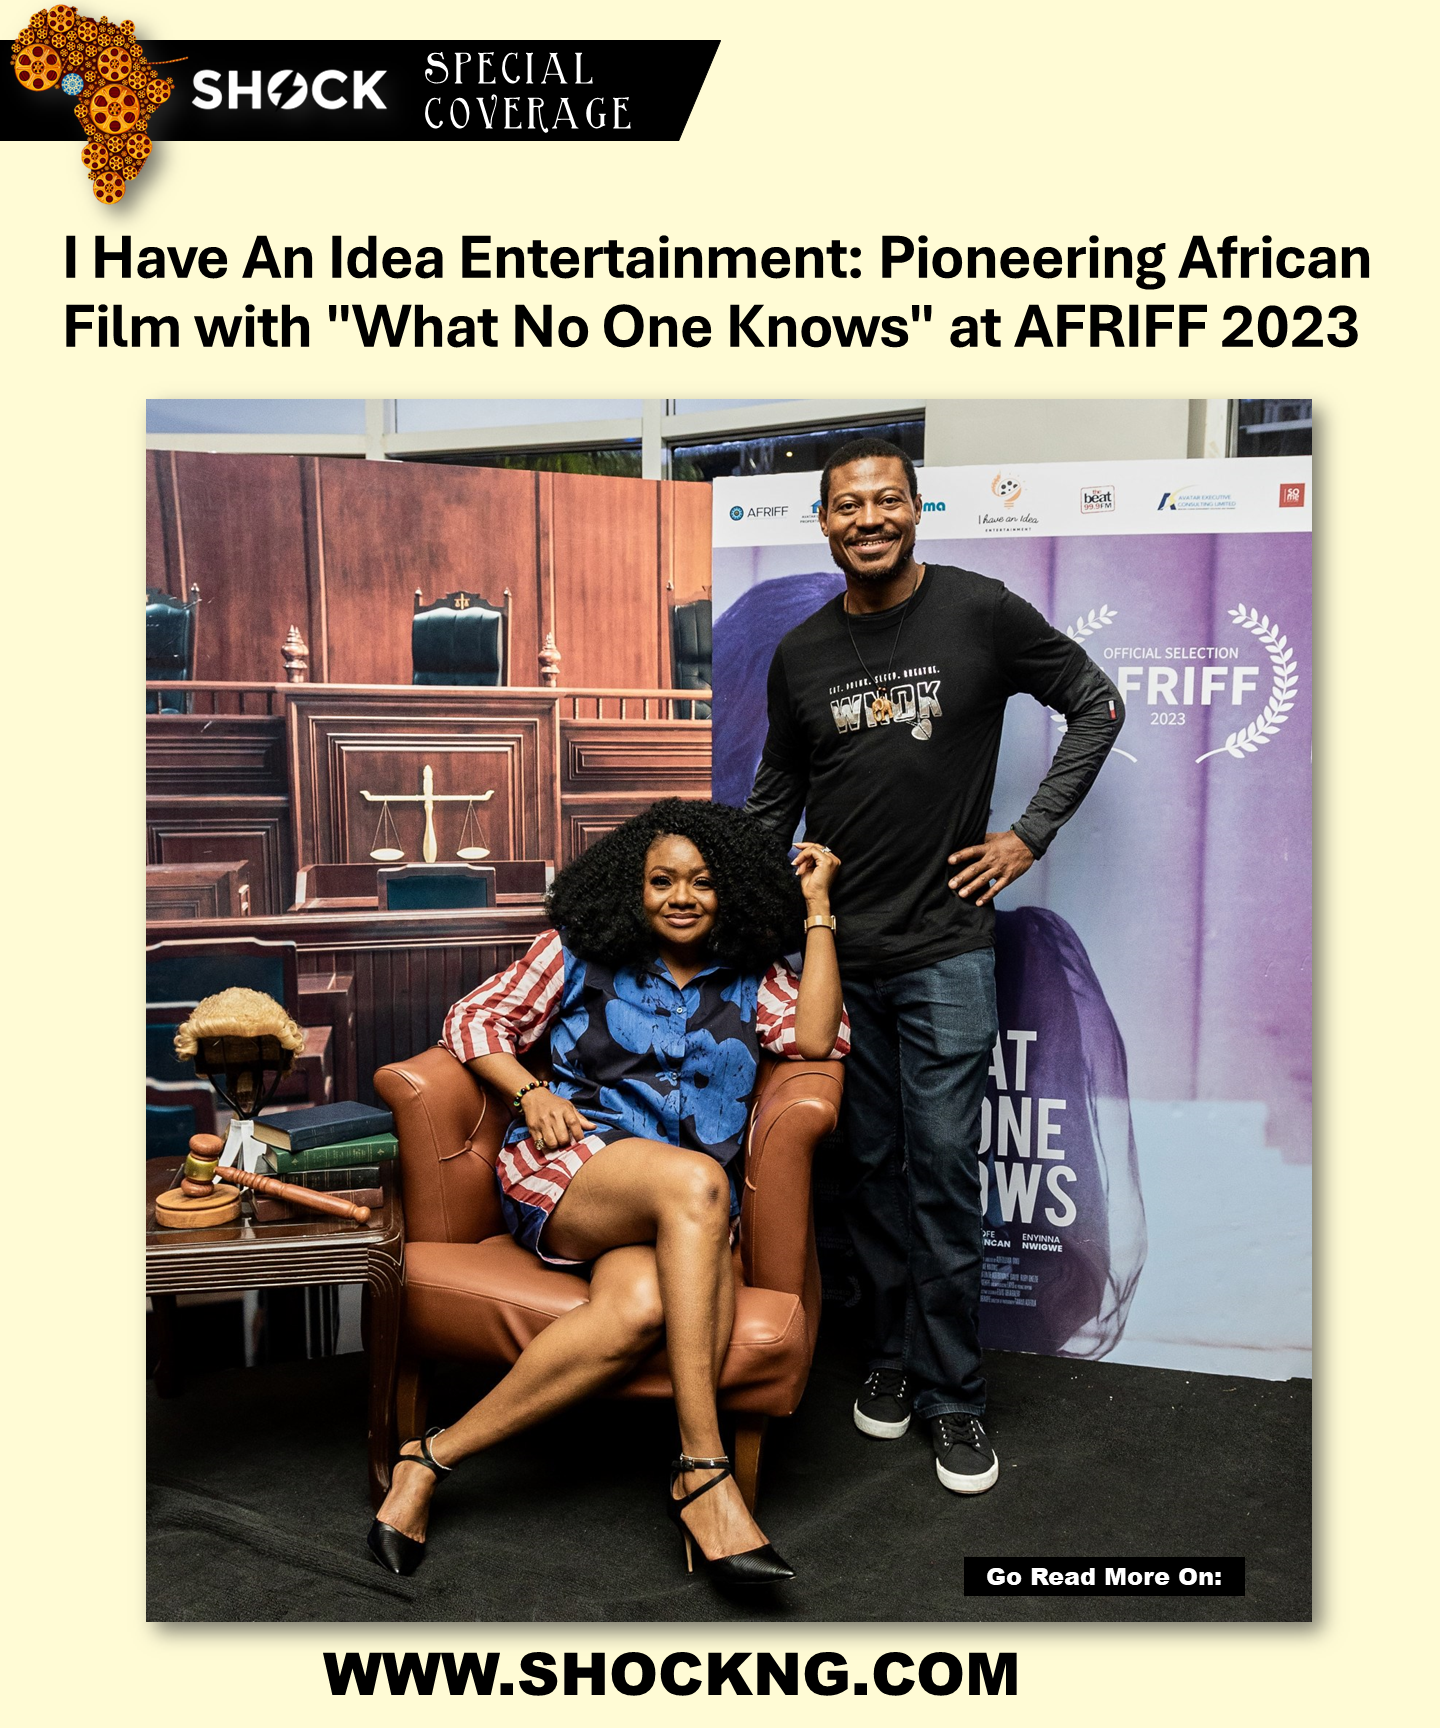 WNOK film - I Have An Idea Entertainment: Pioneering African Film with "What No One Knows" at AFRIFF 2023